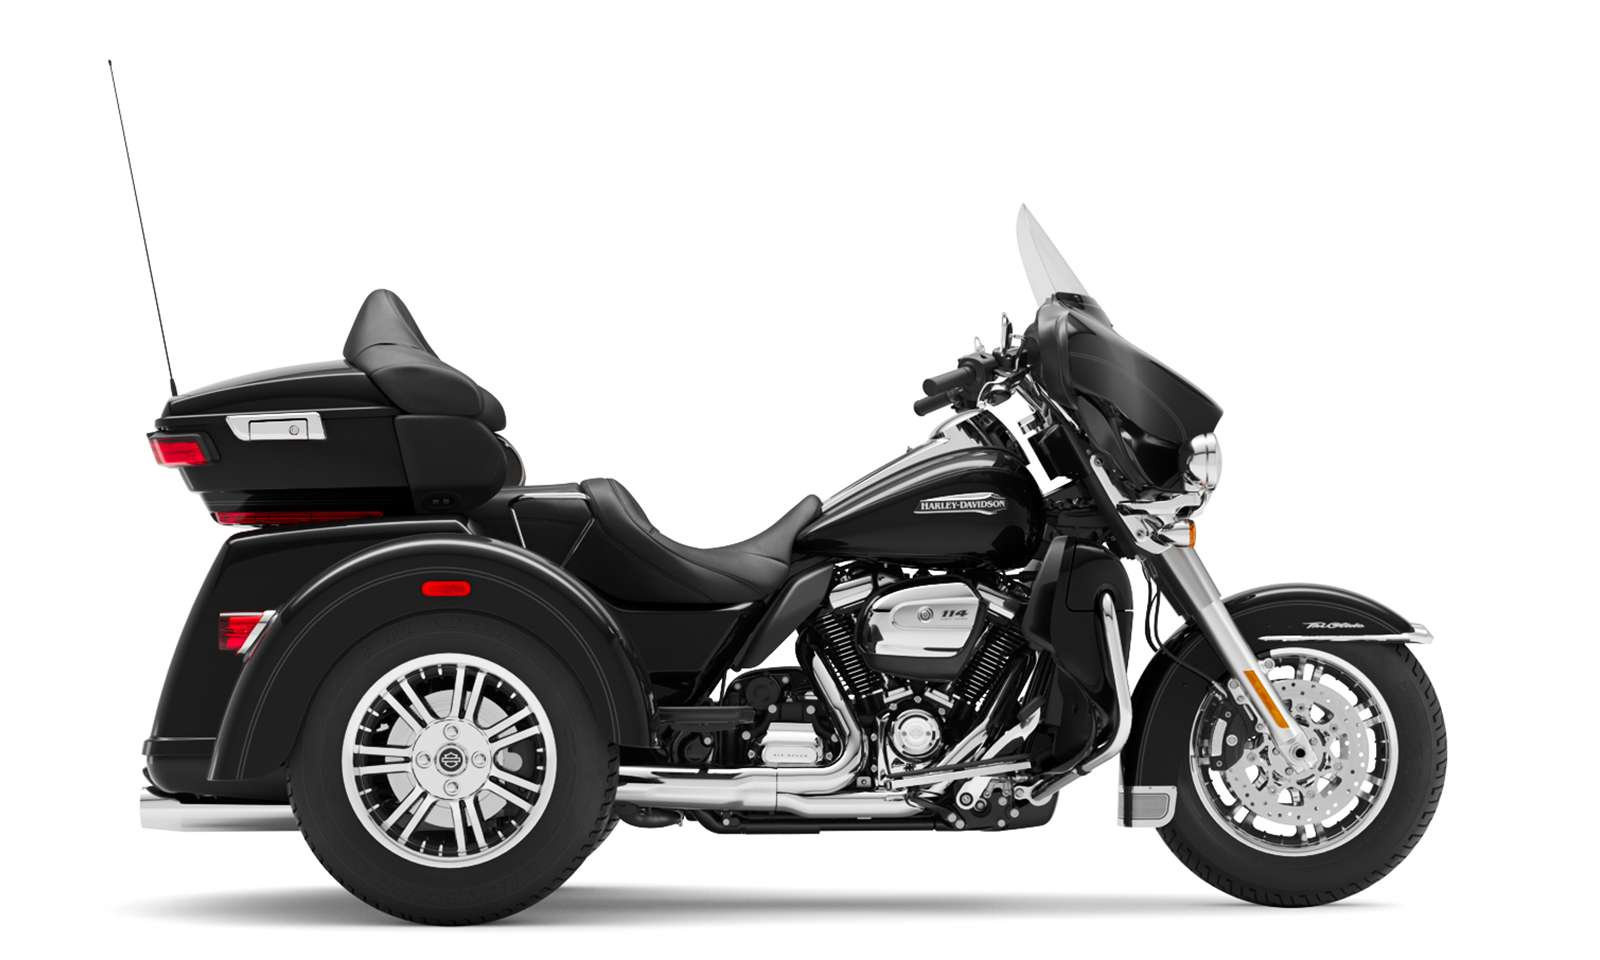 2019 Harley Davidson Cvo Street Glide Review 14 Fast Facts